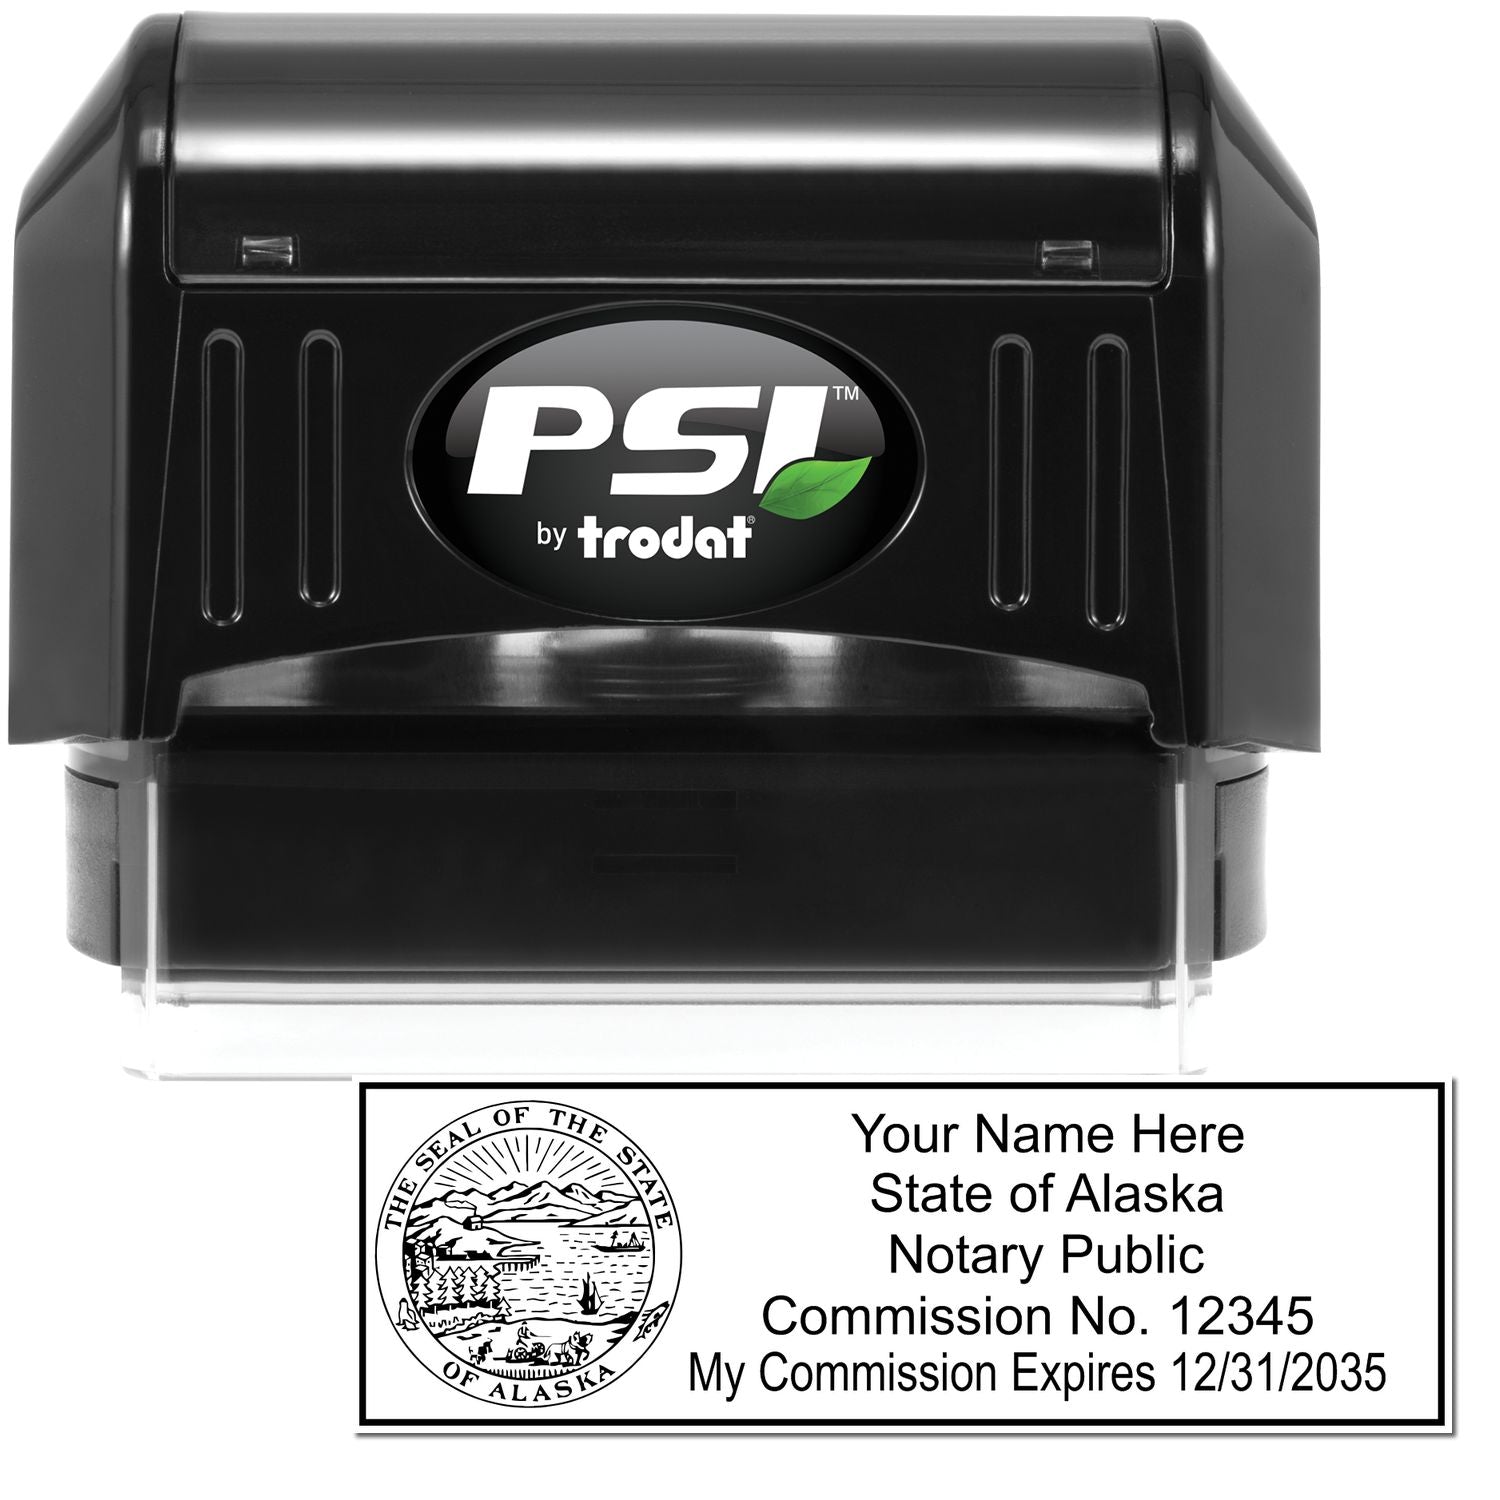 The main image for the PSI Alaska Notary Stamp depicting a sample of the imprint and electronic files